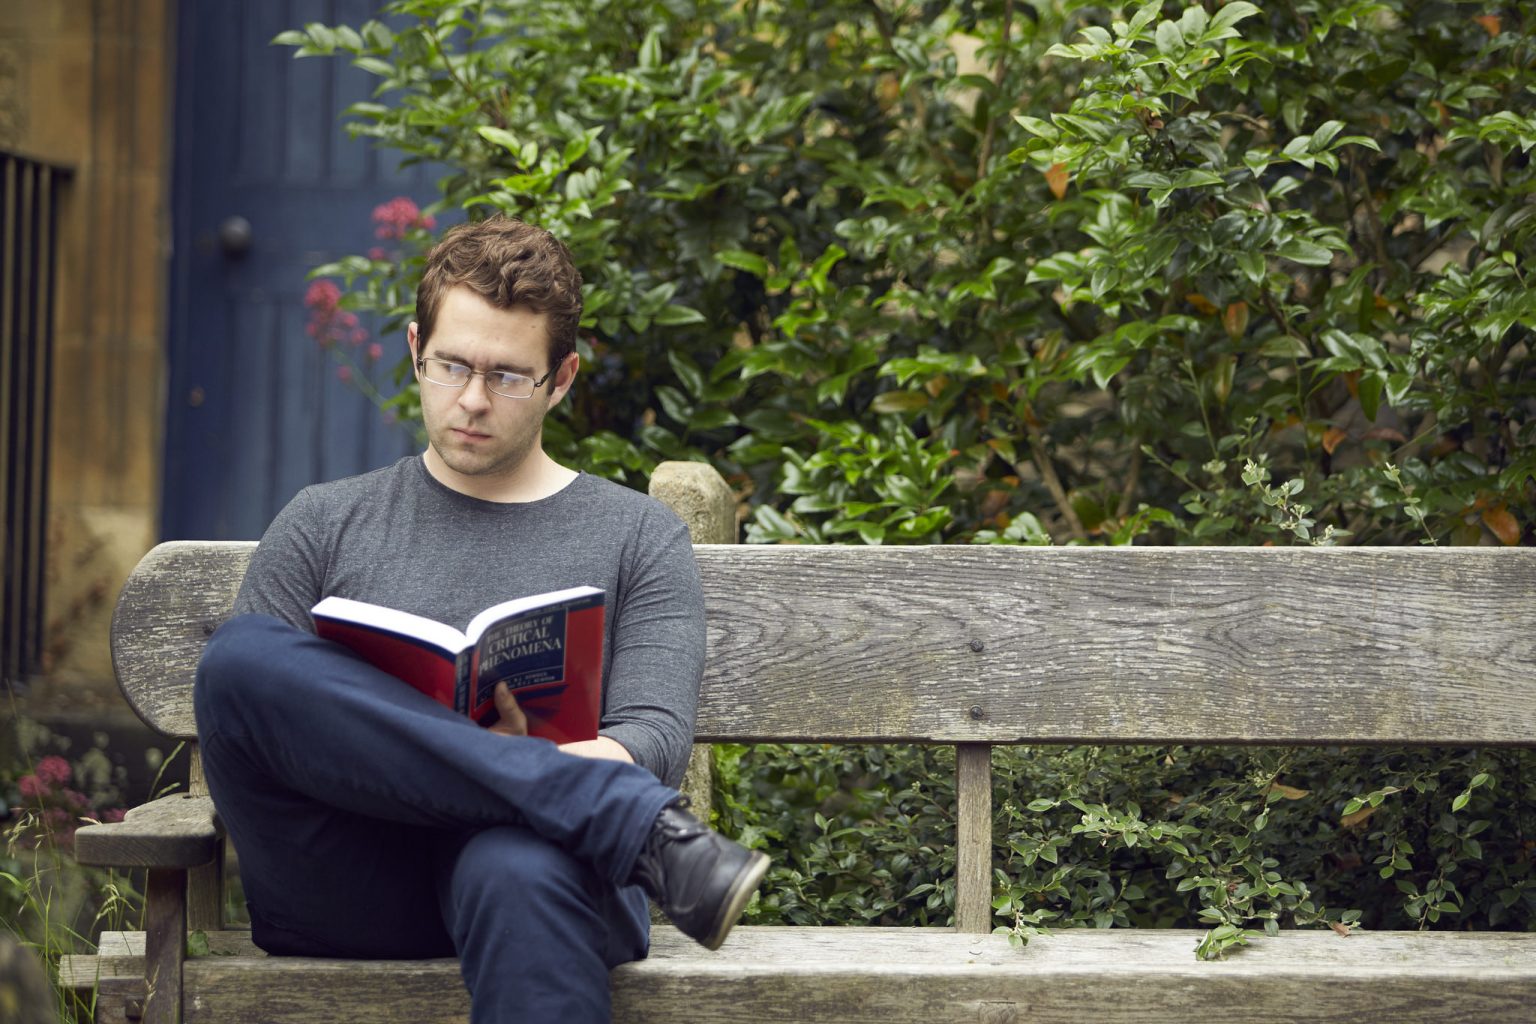 Visiting student Greg reading outside the library in the churchyard